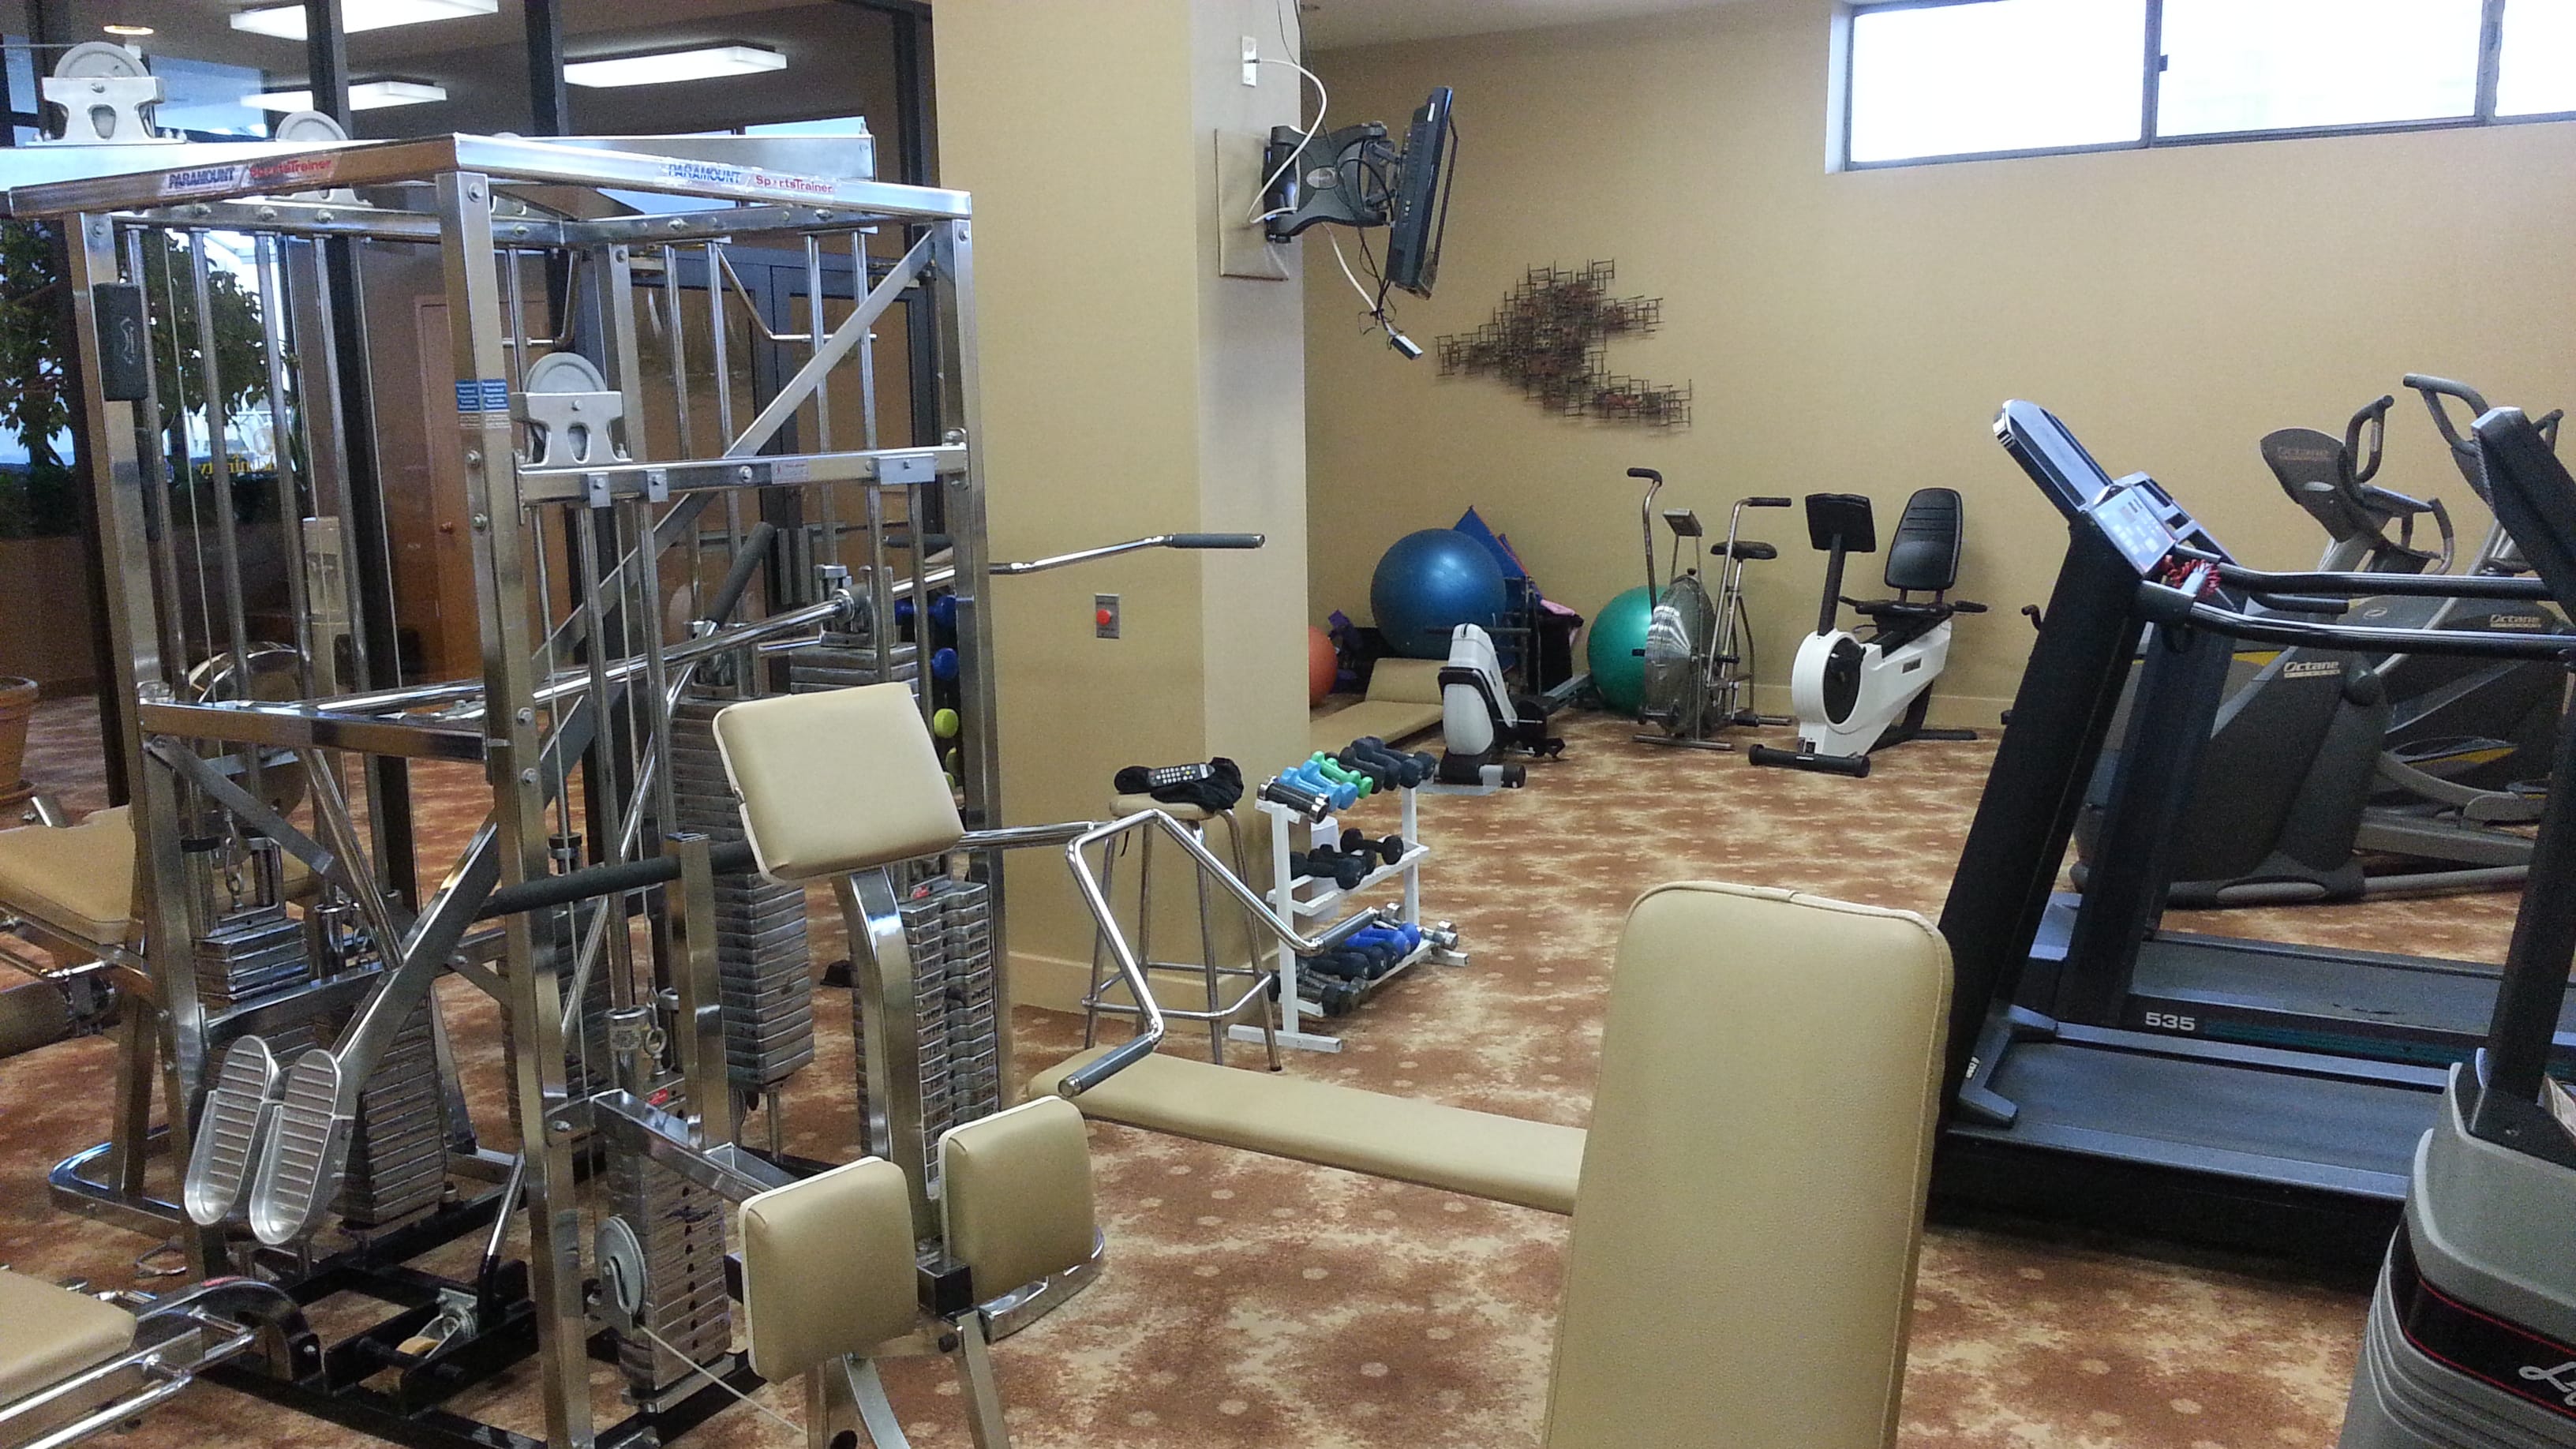 The Admiralty has this well light and equipped fitness room.